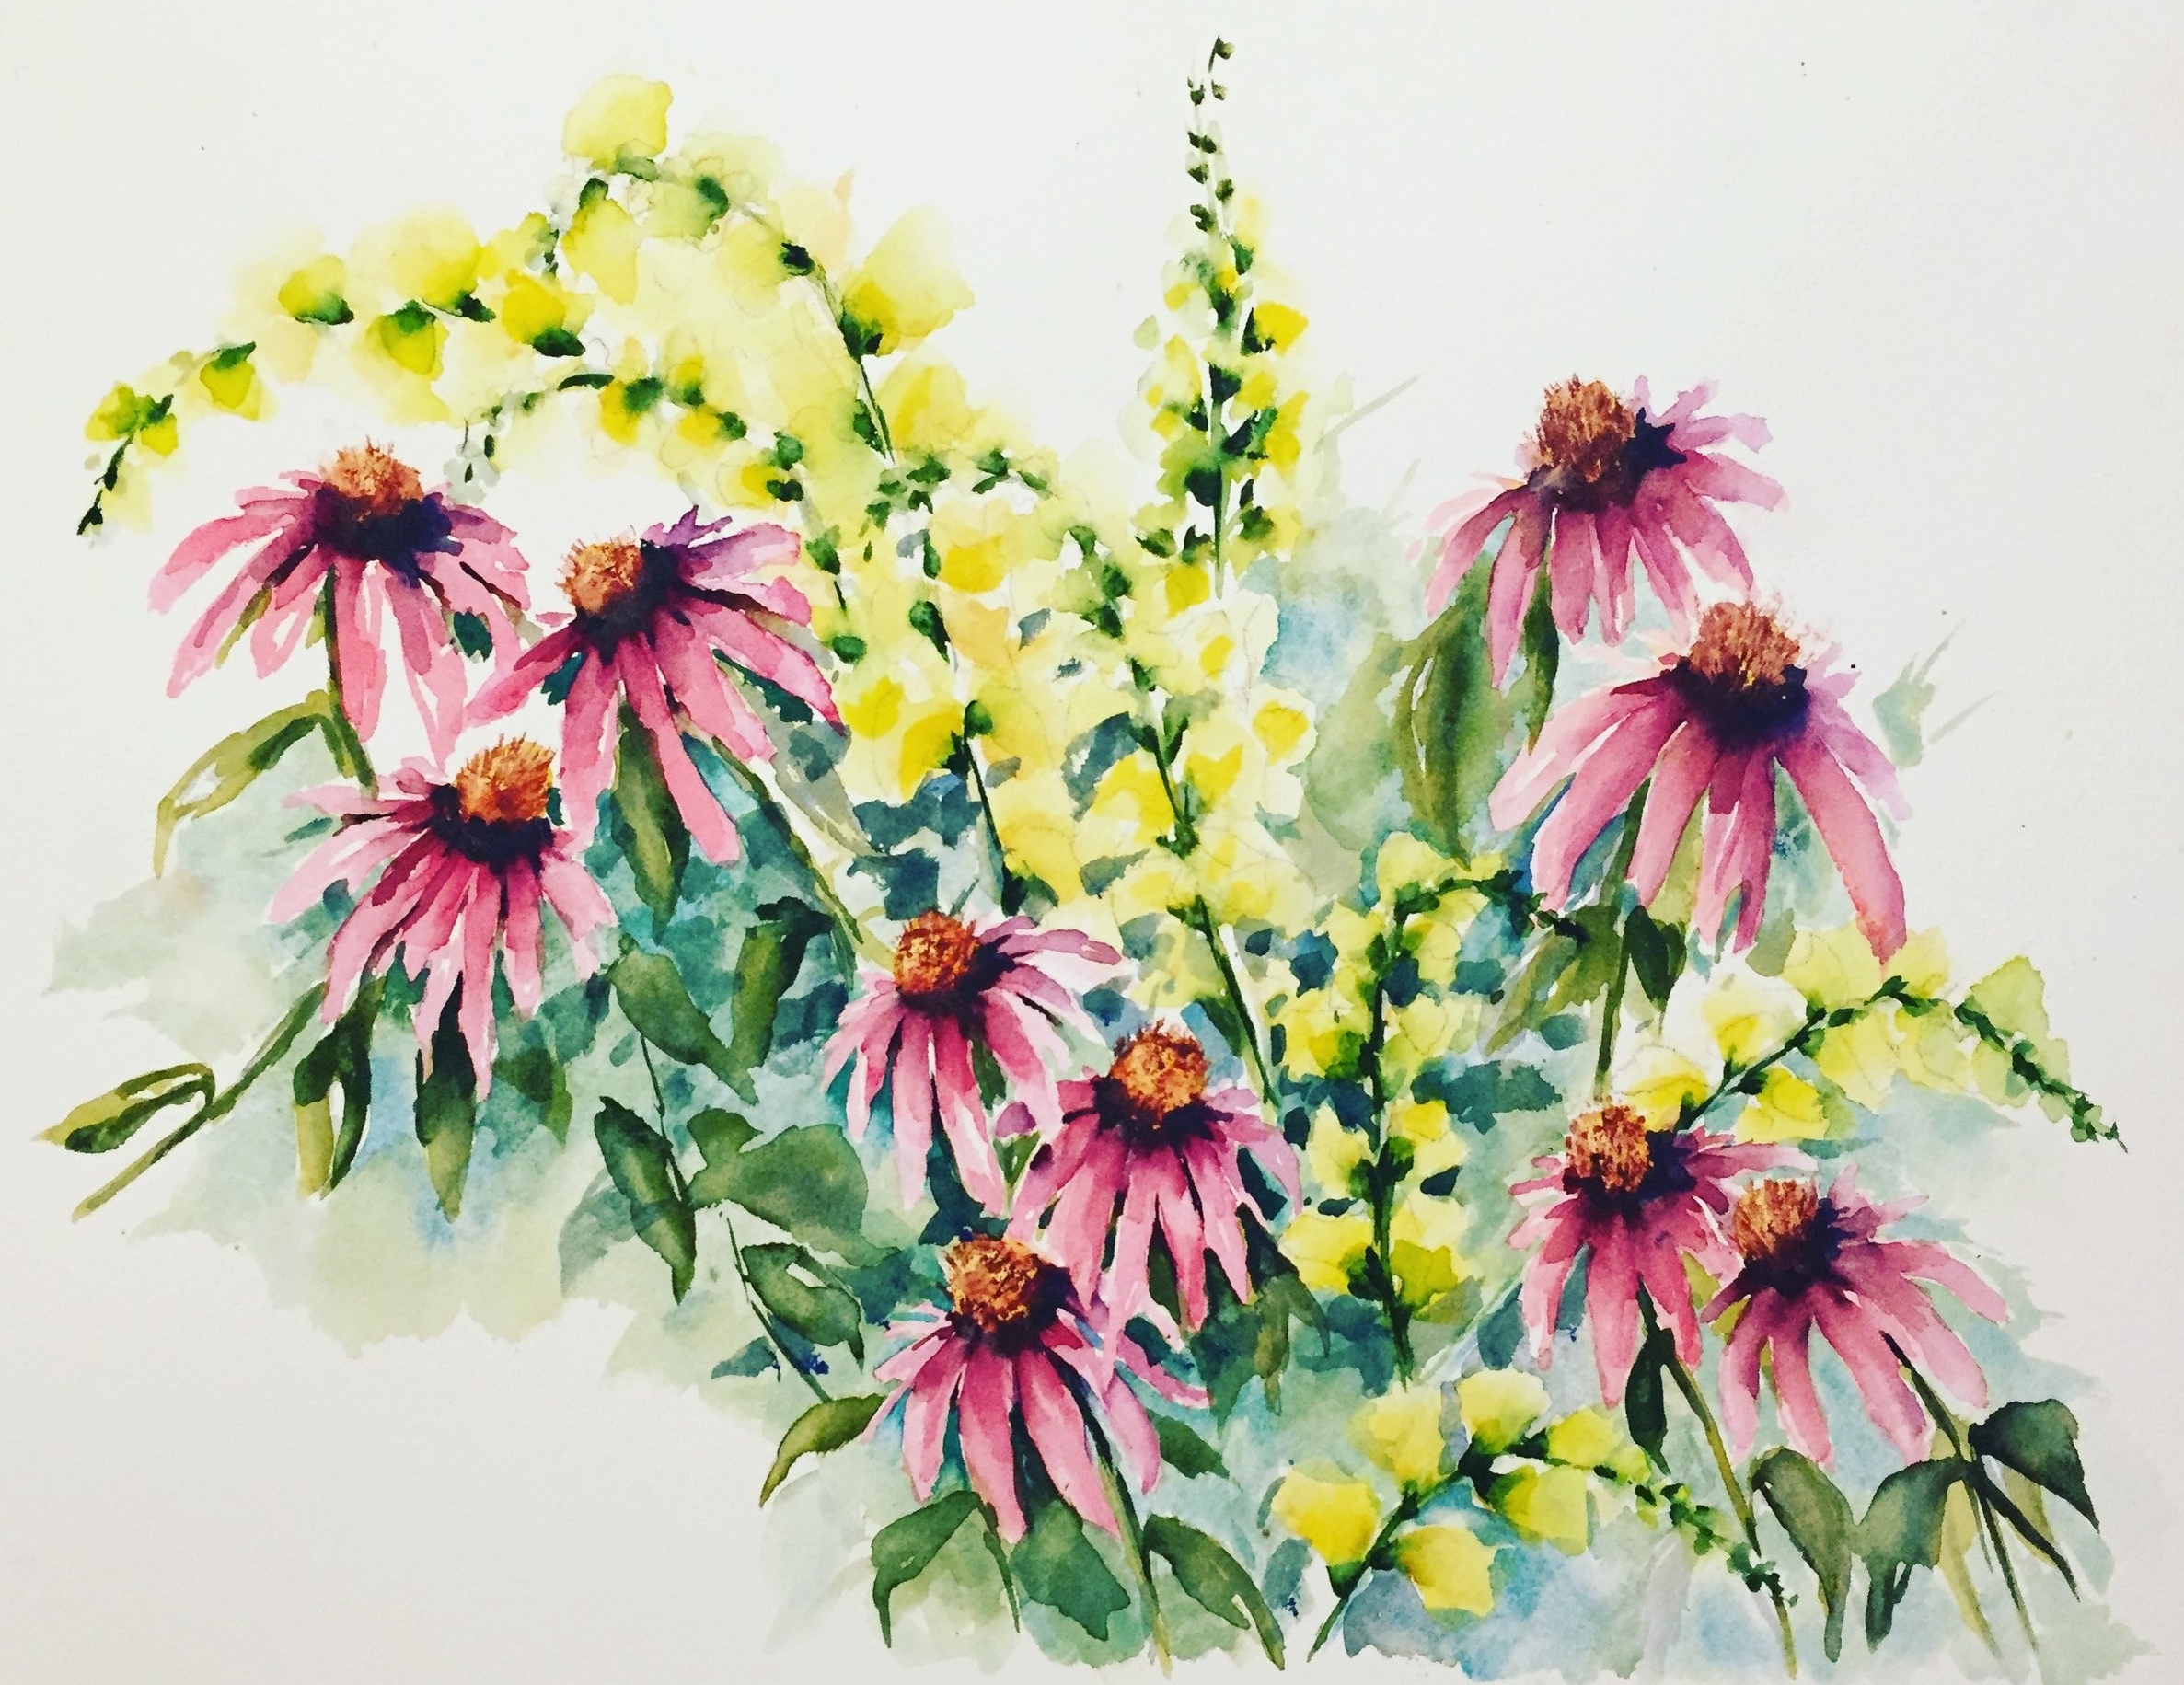  Watercolor echinacea & snapdragons painted by me // Summer 2017 